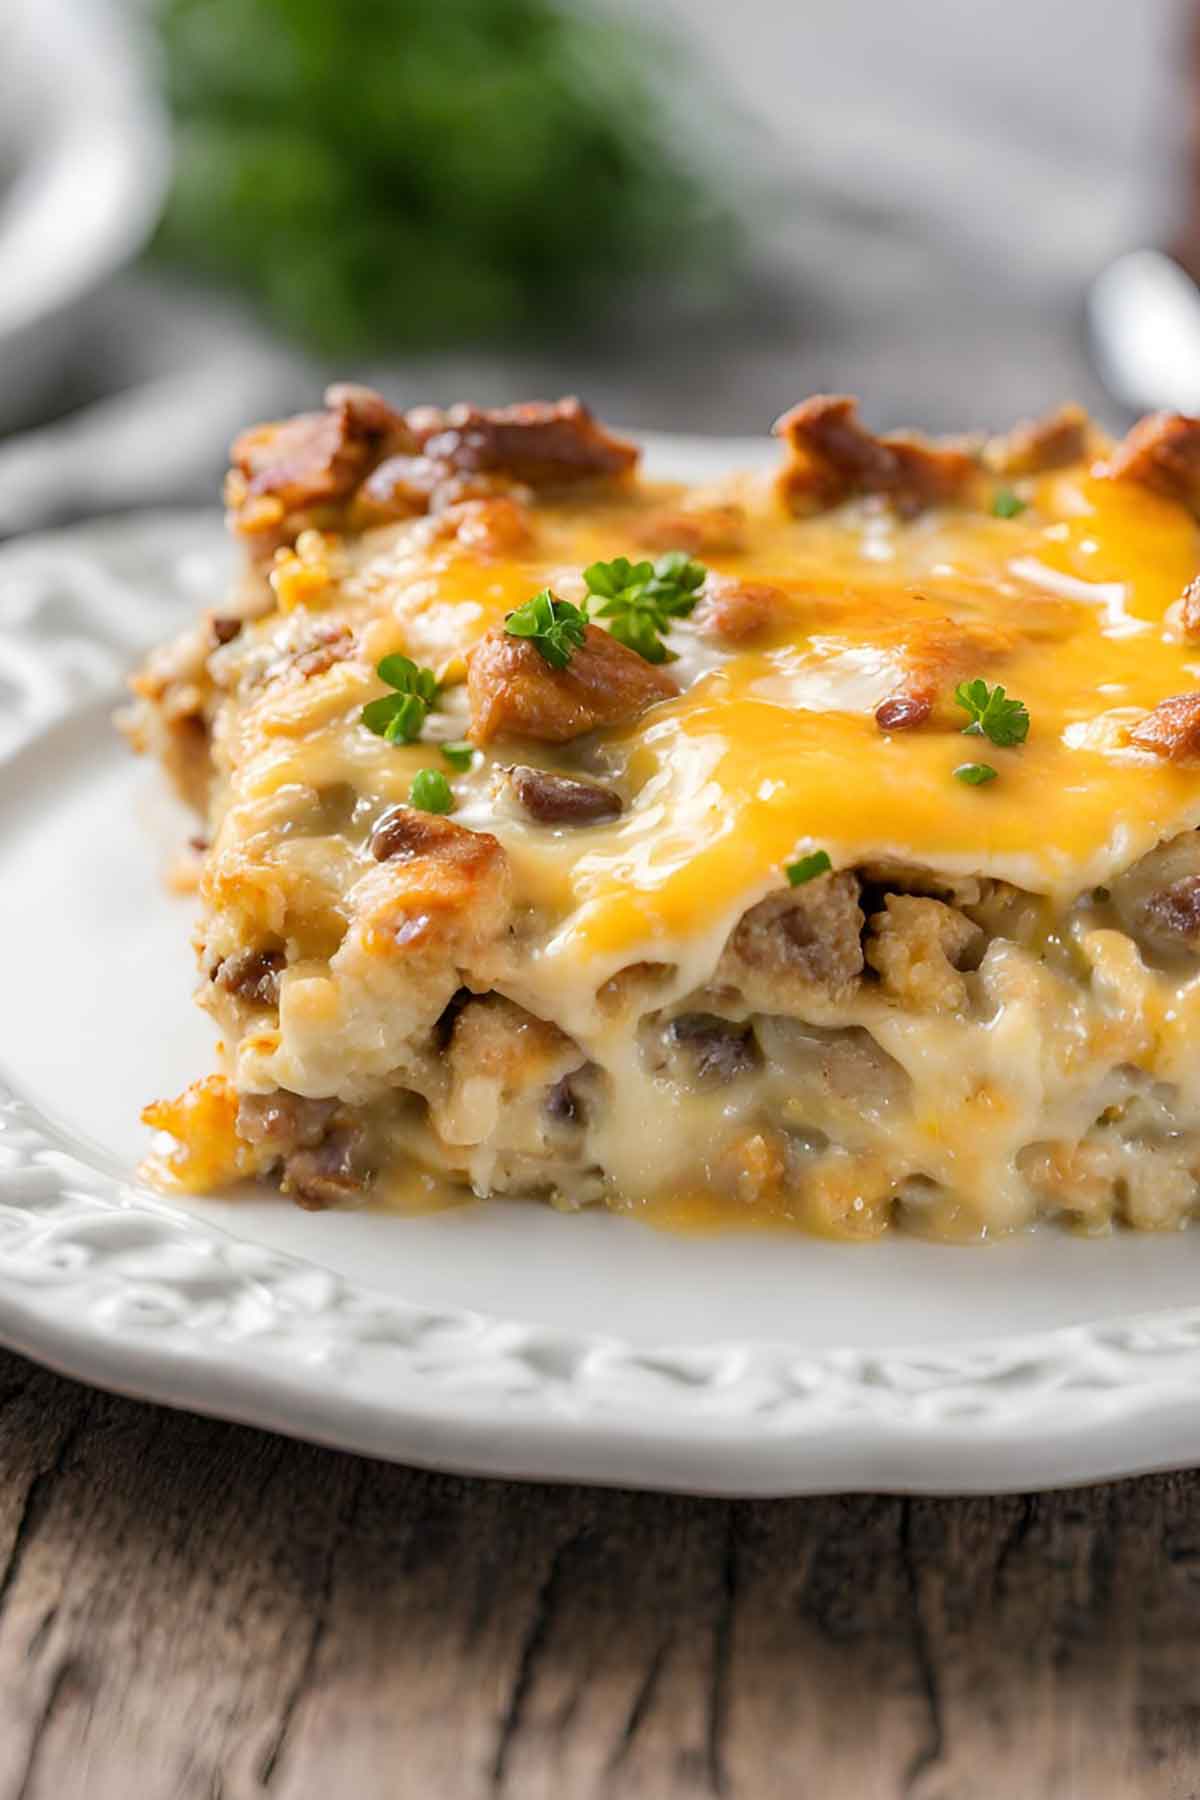 A slice of Sausage and Egg Breakfast Casserole on fancy white plate